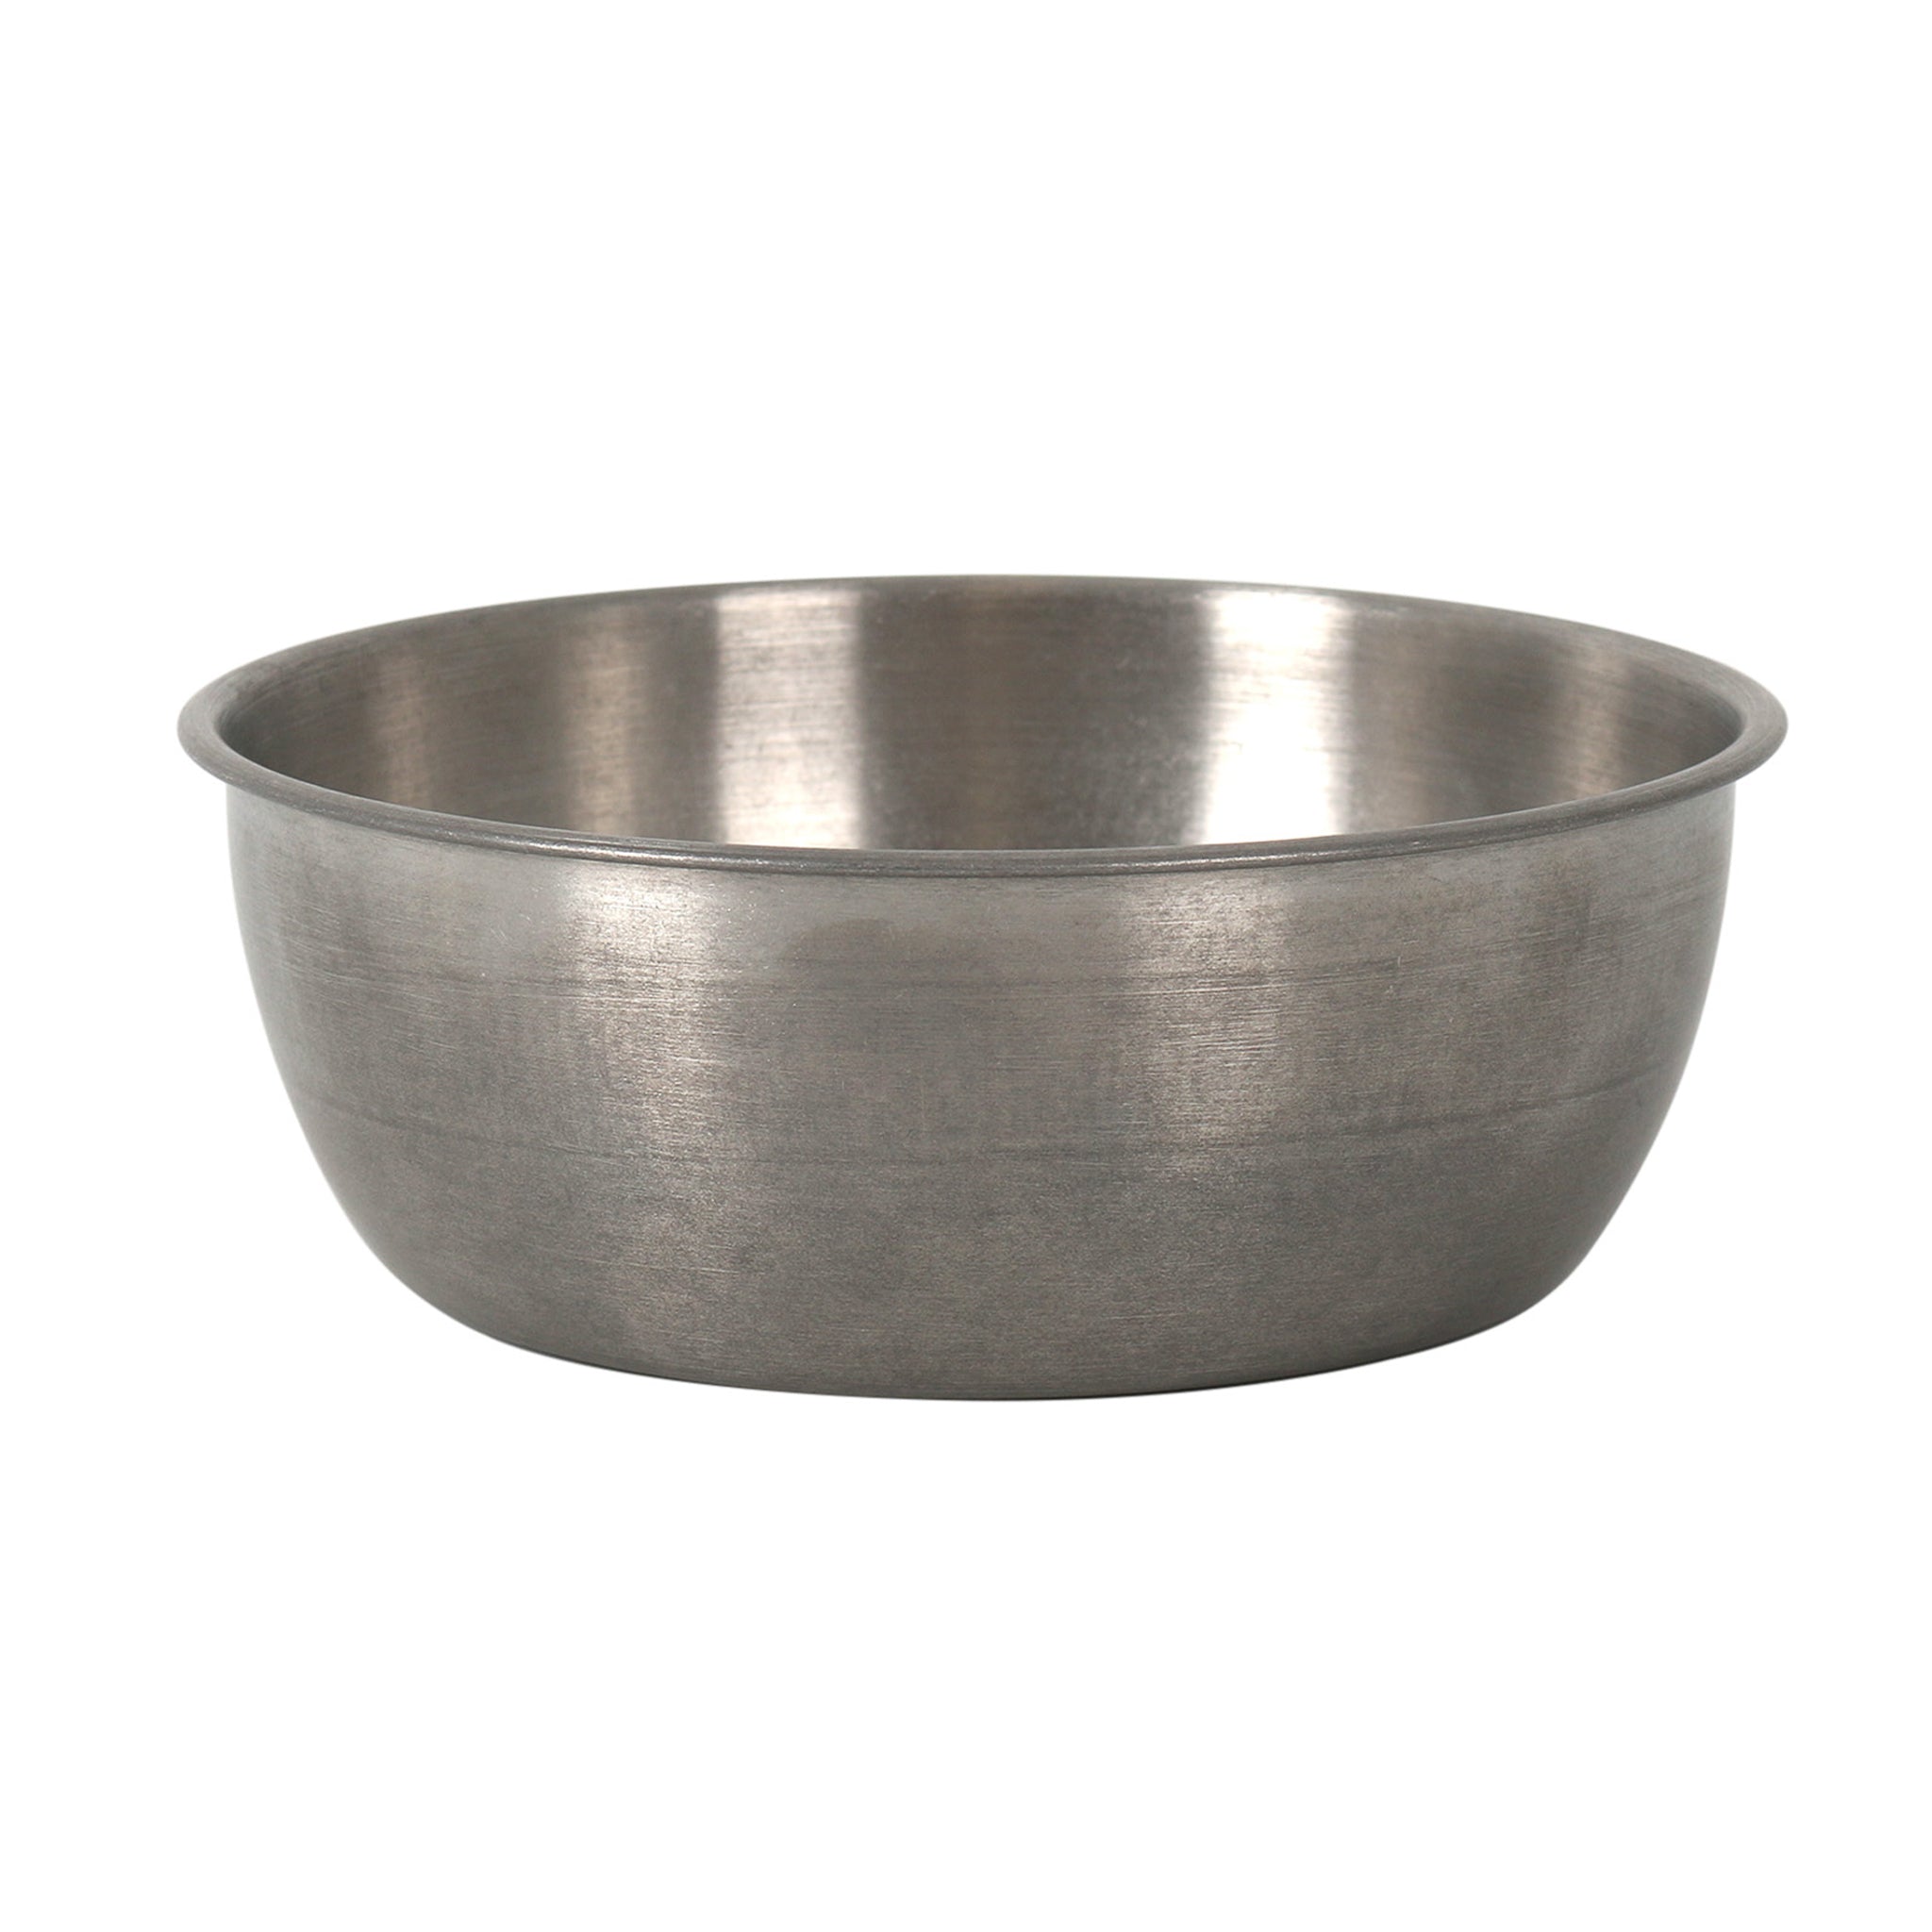 Vintage Style Stainless Steel Bowl, 14.5cm